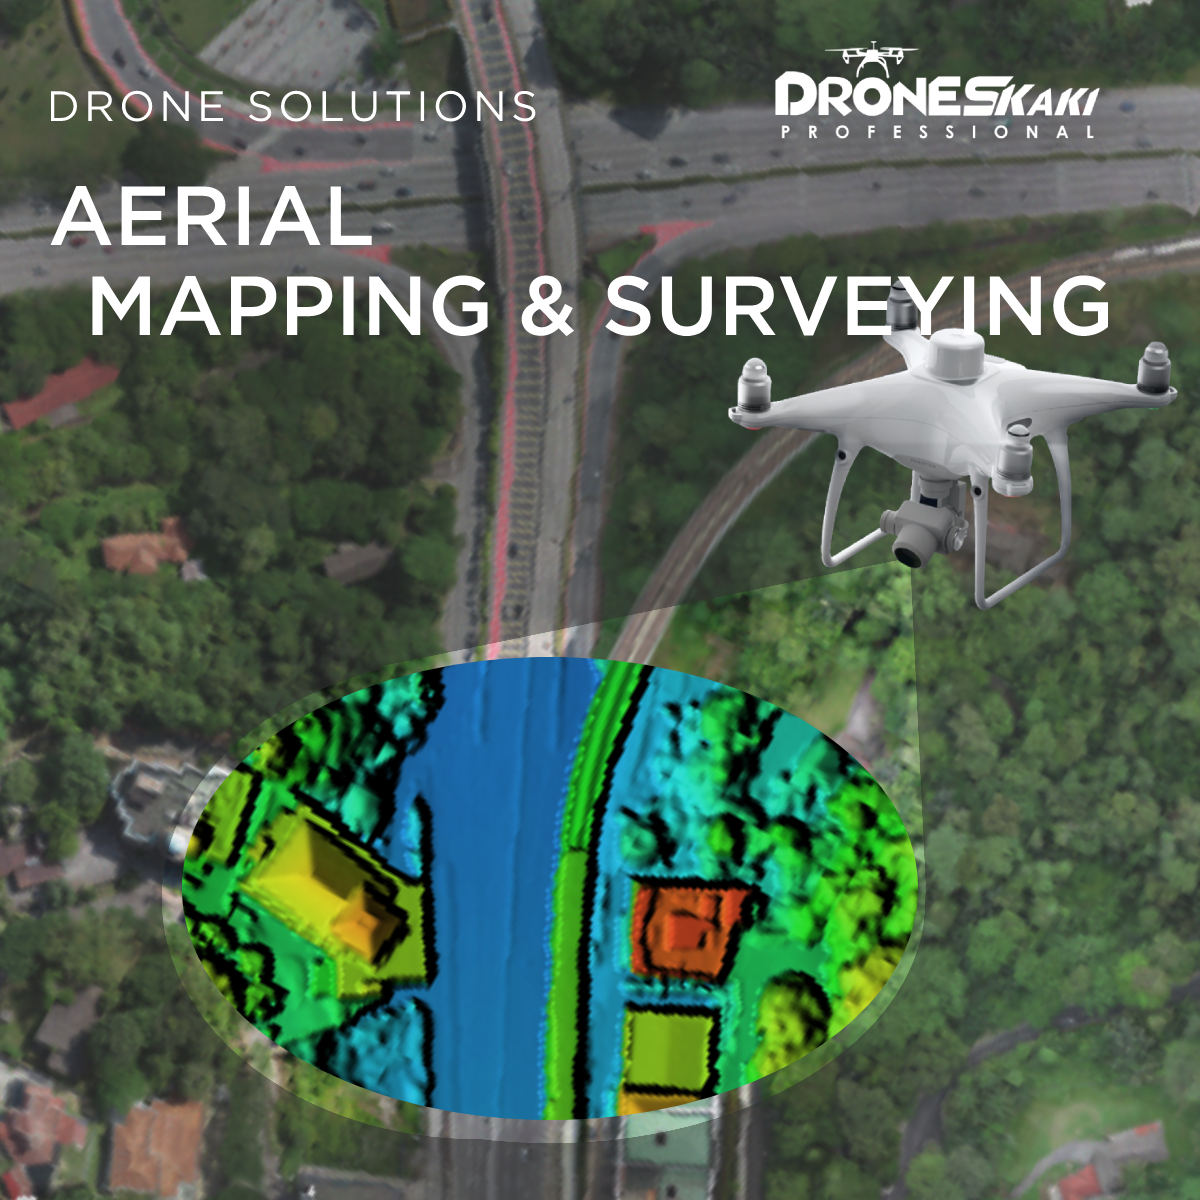 DRONE SOLUTIONS ADS.png